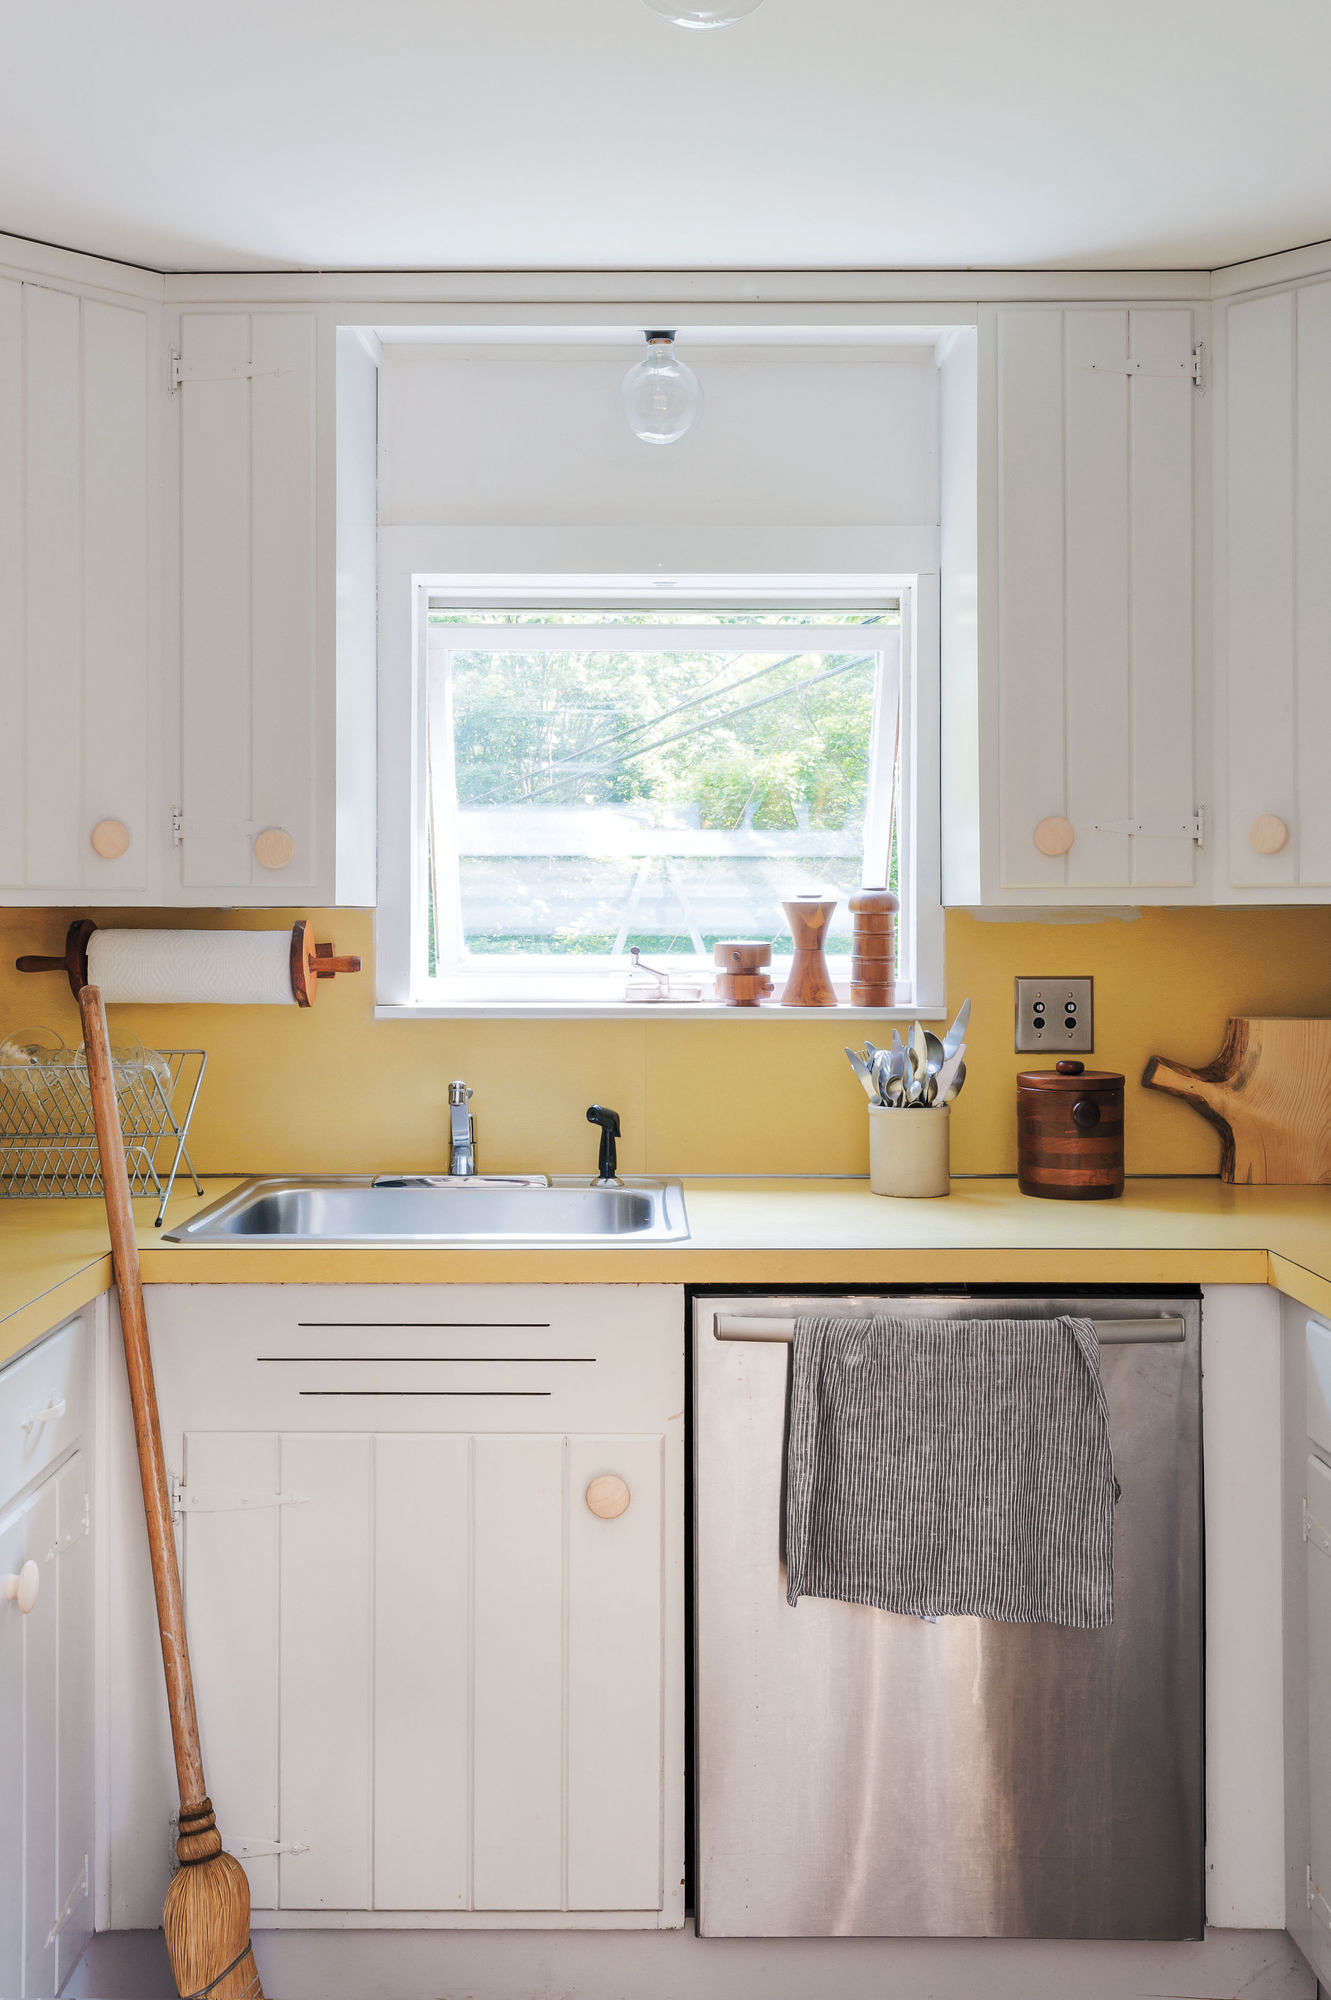 Expert Tips On Painting Your Kitchen Cabinets